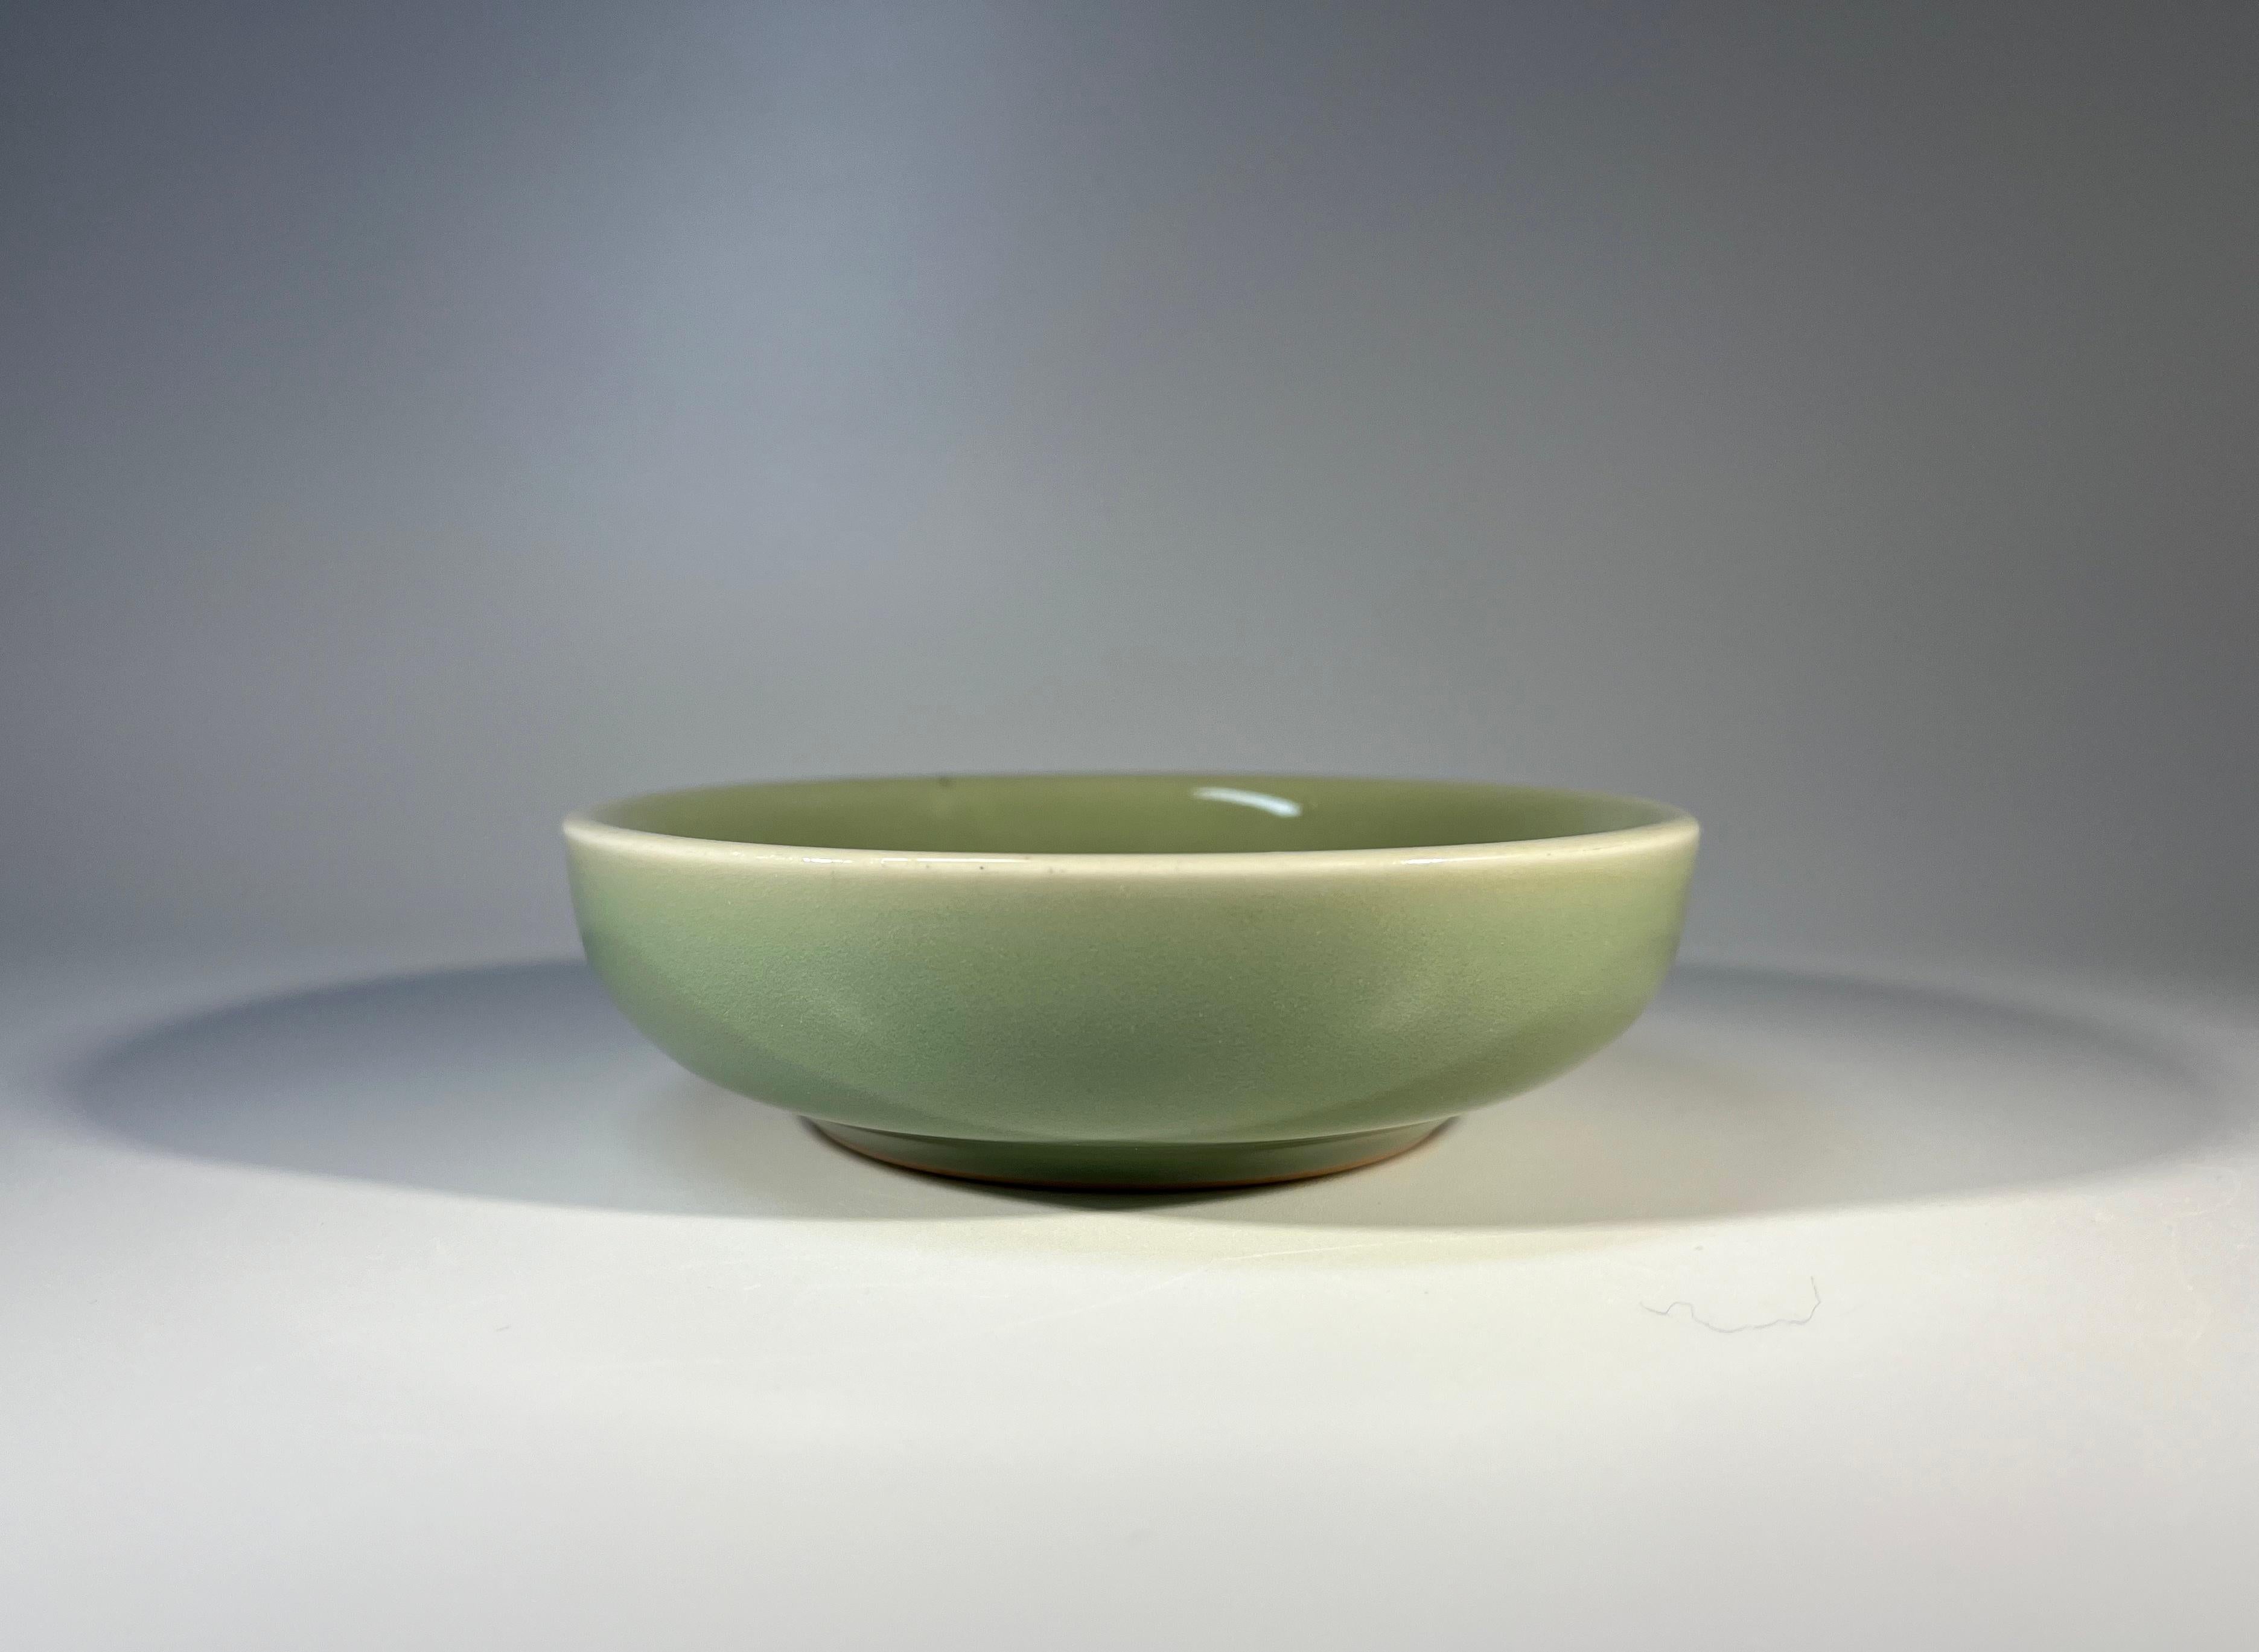 Elegant small celadon dish by Gerd Bøgelund for Royal Copenhagen 
Ageless design from the acclaimed Danish ceramicist
Circa 1959
Stamped and numbered 21415
Height 1.25 inch, Diameter 4.5 inch
In very good condition. Small firing fault on rim
Wear